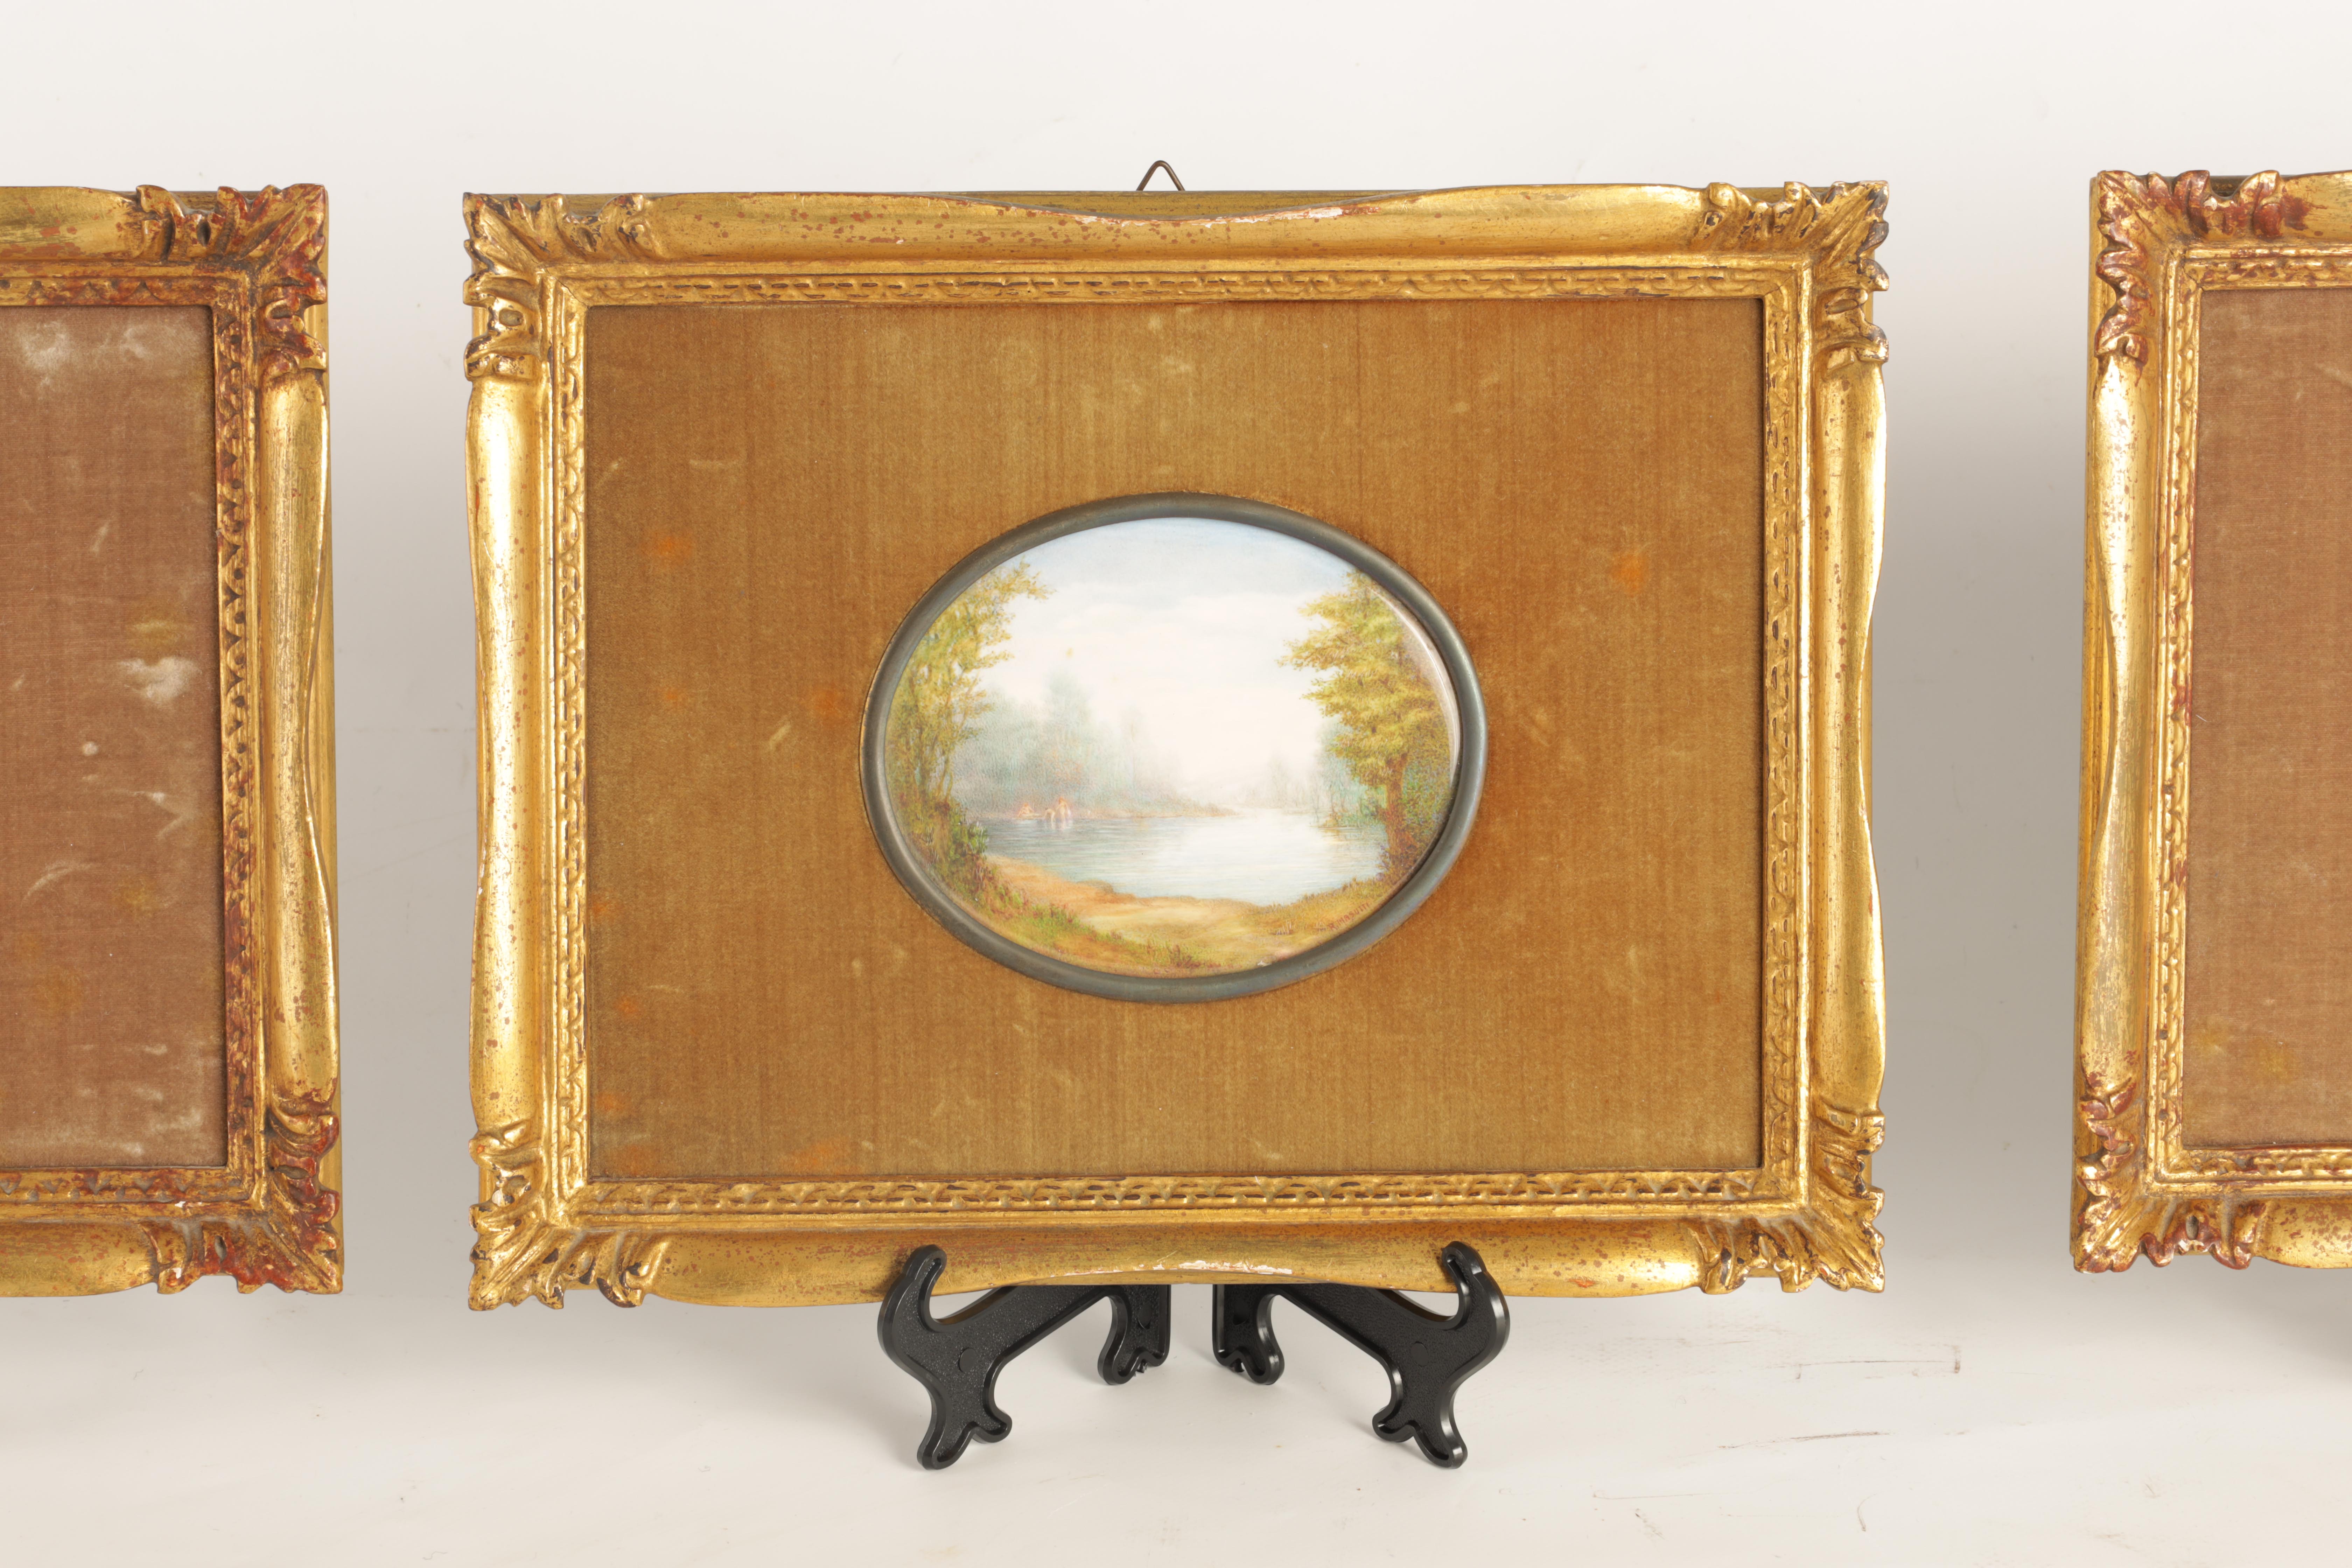 R. MASUTTI A SET OF FOUR LATE 19TH CENTURY OVAL MINIATURES ON IVORY landscape and lake views 9cm - Image 11 of 13